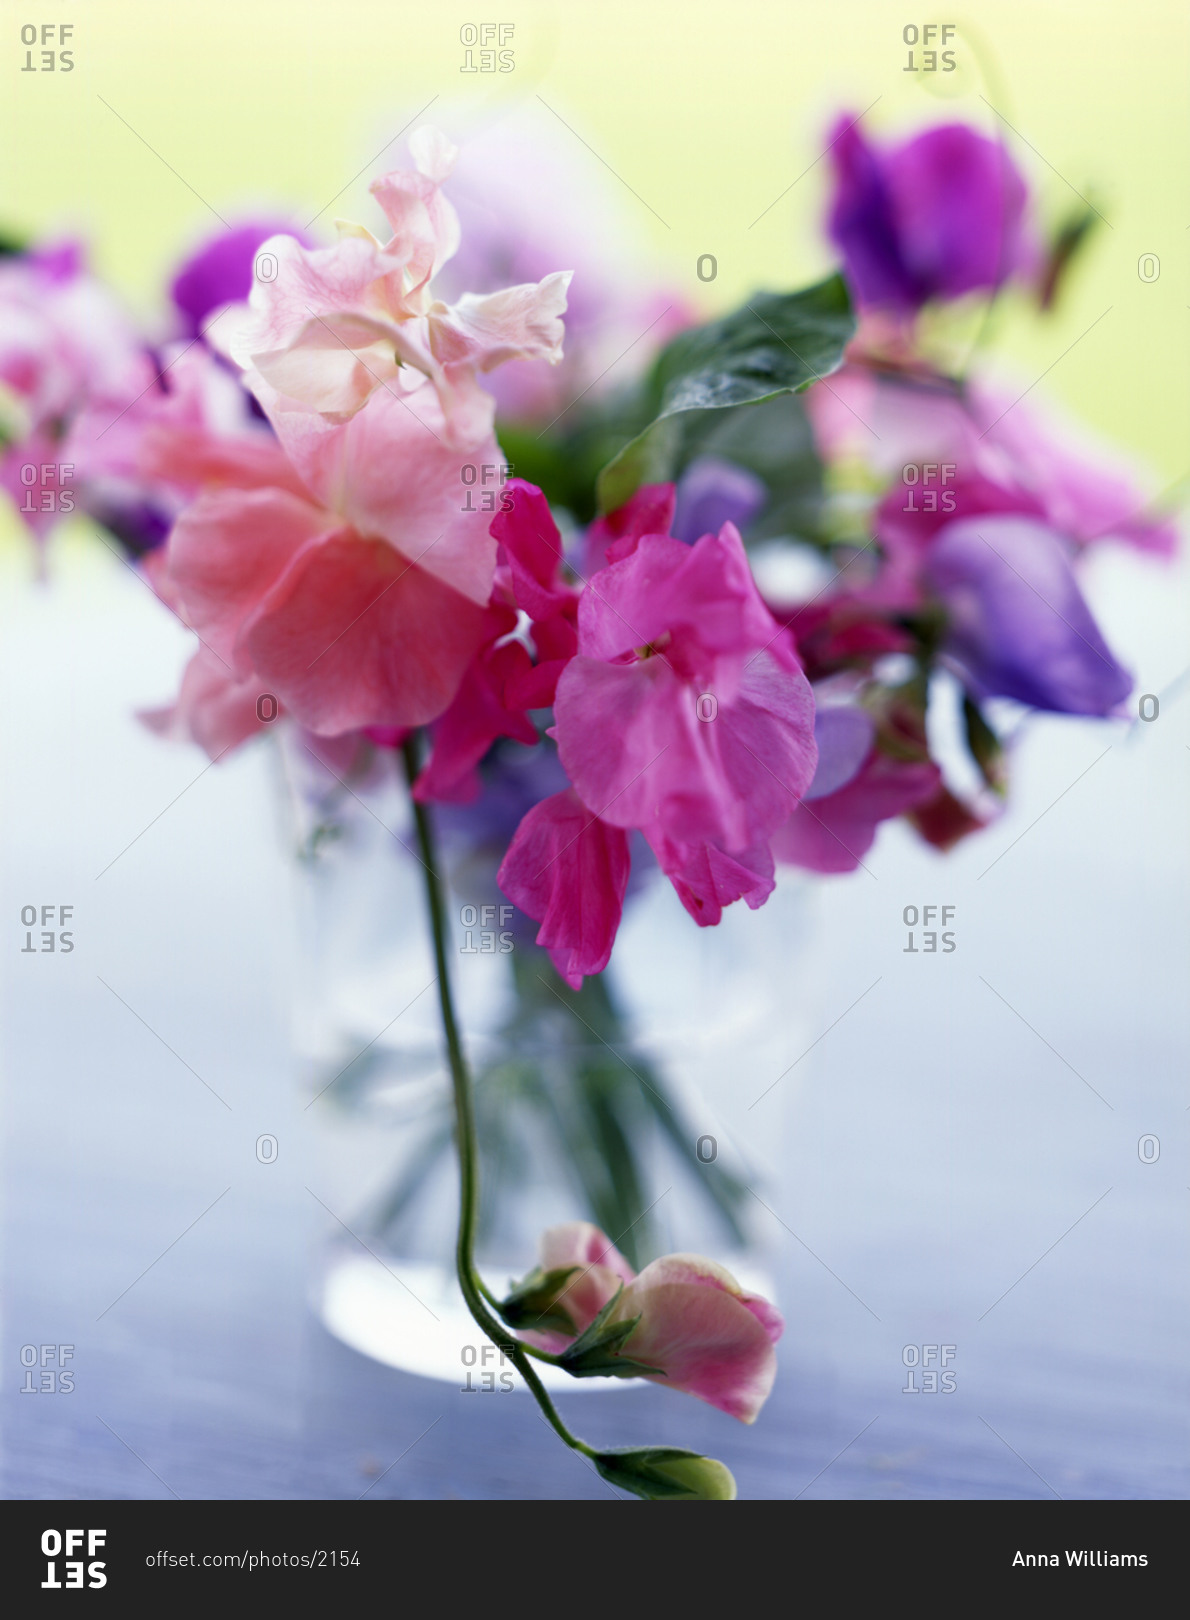 Bunch of pink flowers in a vase.